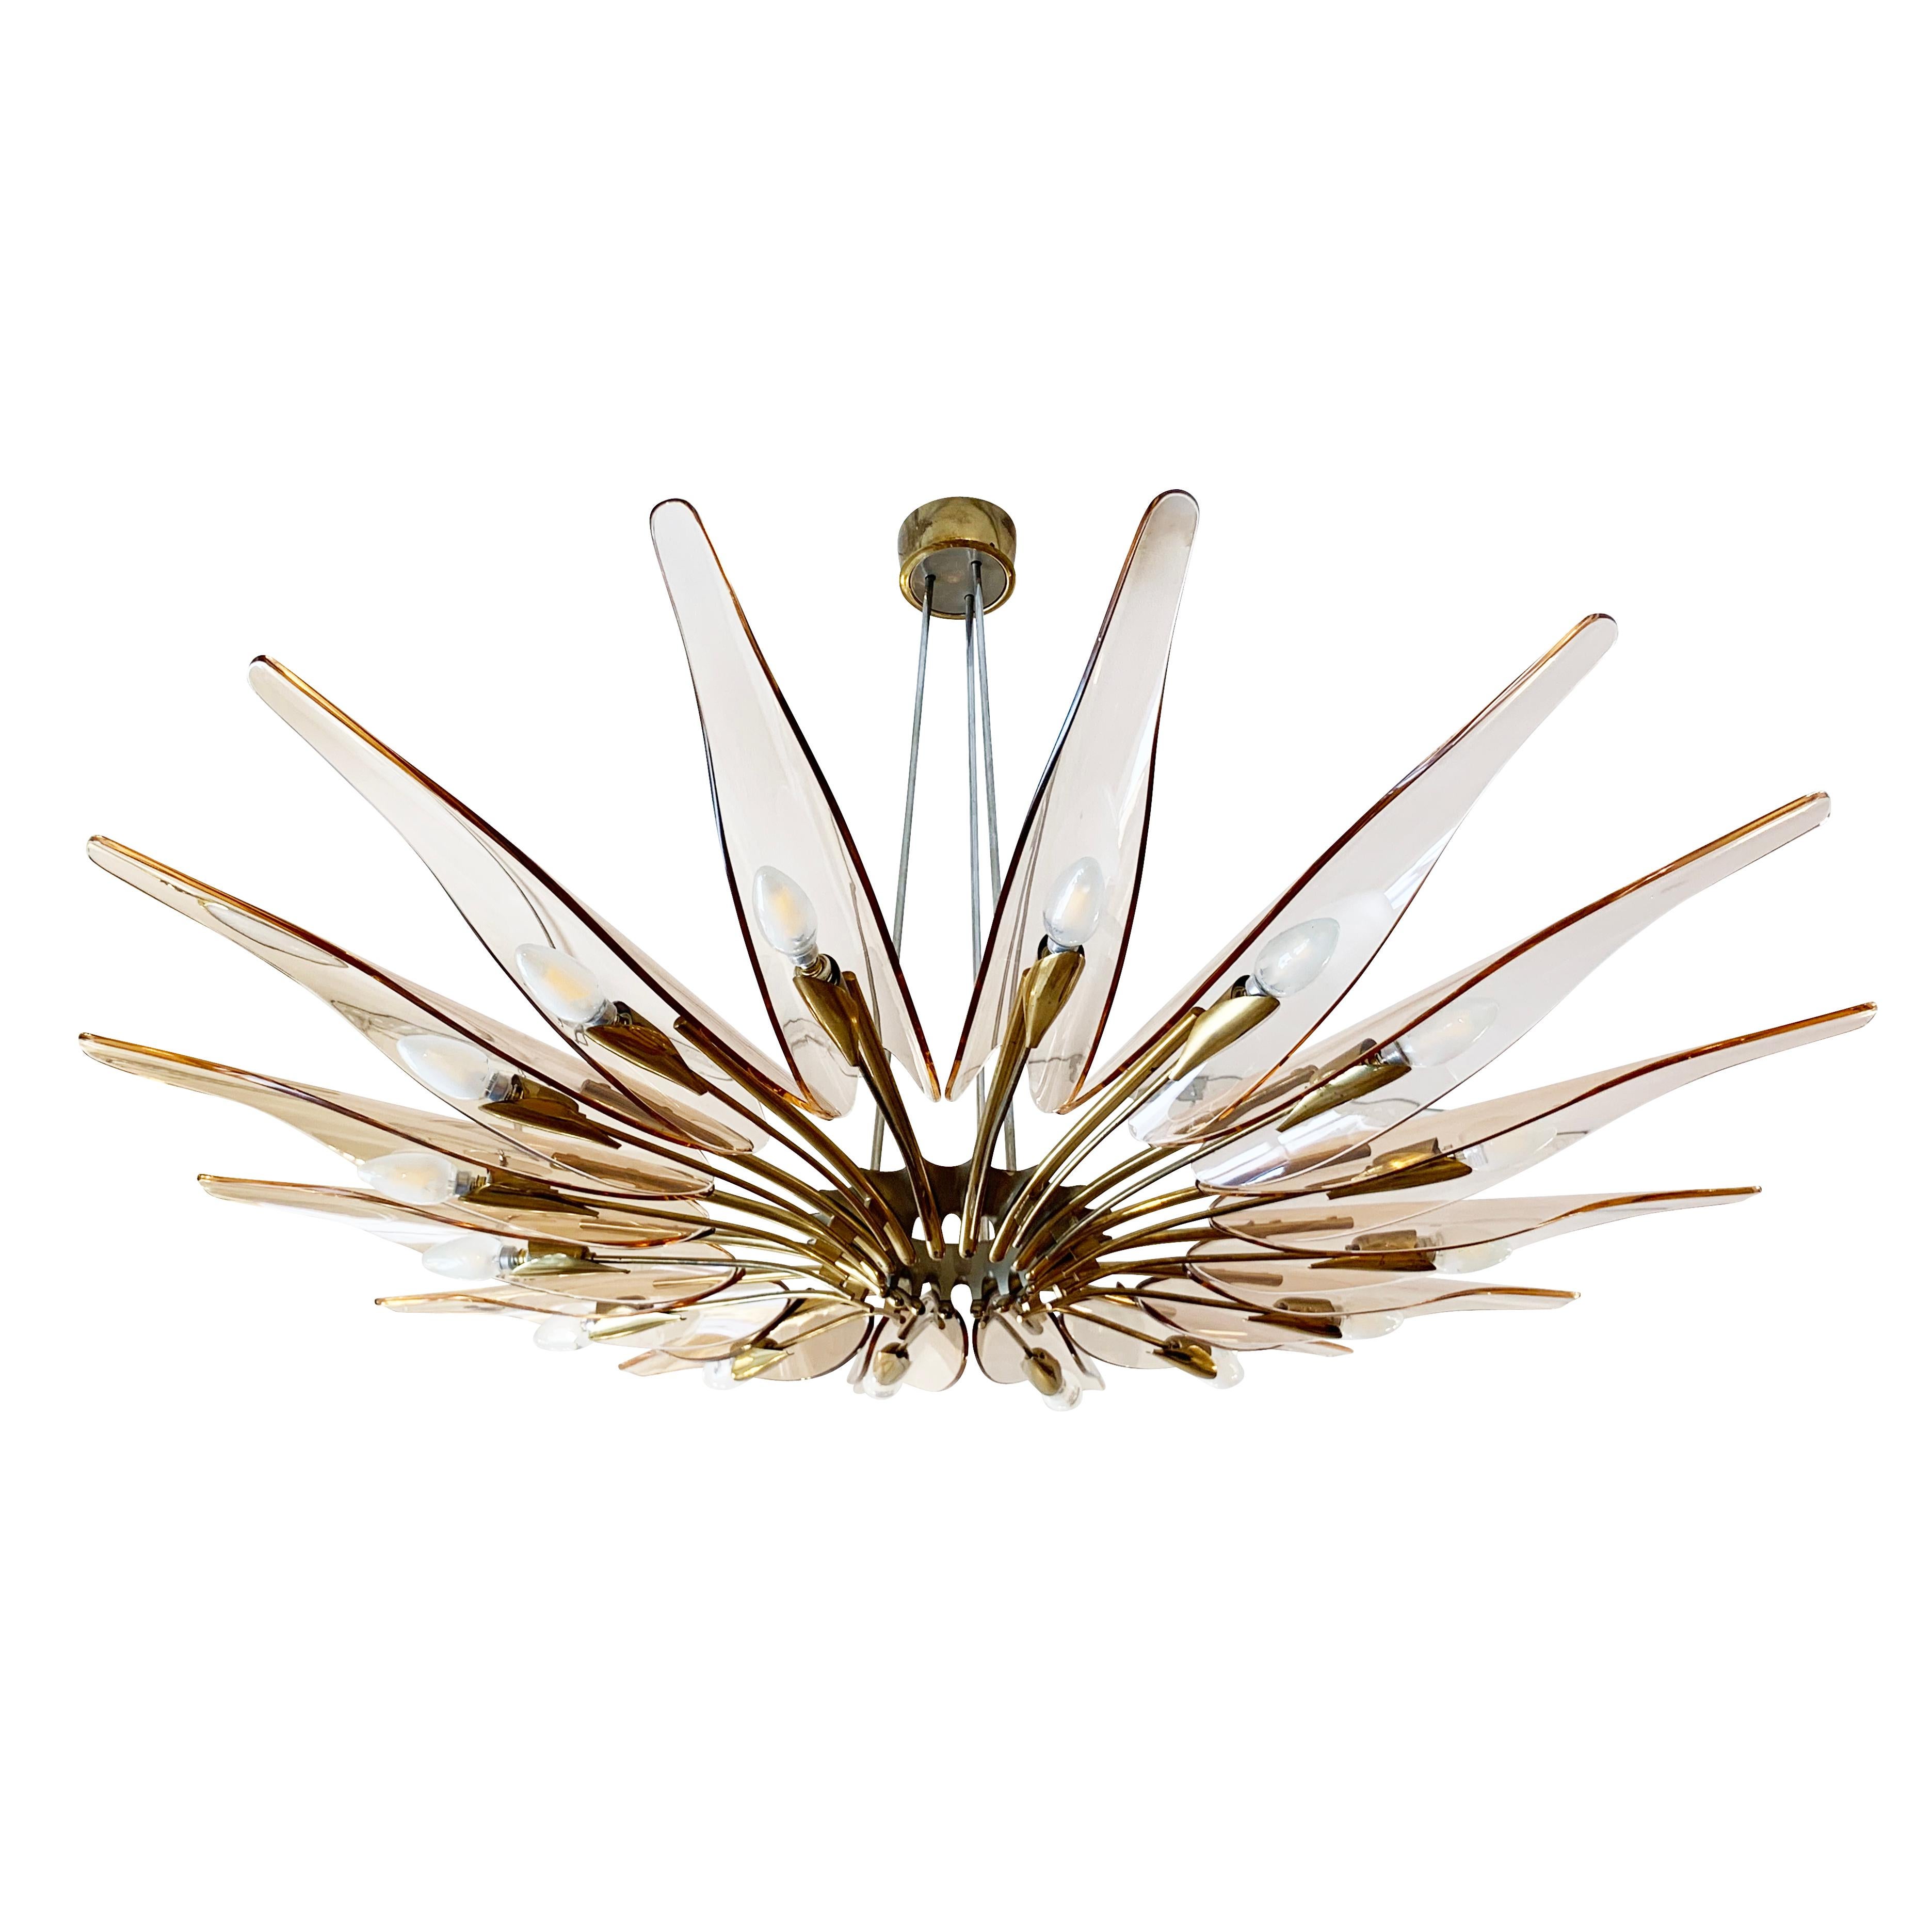 Dahlia Chandelier by Max Ingrand for Fontana Arte
$78,000.00
The Dahlia chandelier, Model 1563, designed by Max Ingrand for Fontana Arte in the 1950s is one of the most coveted and iconic pieces of Italian Mid-Century design. Rose glass petals